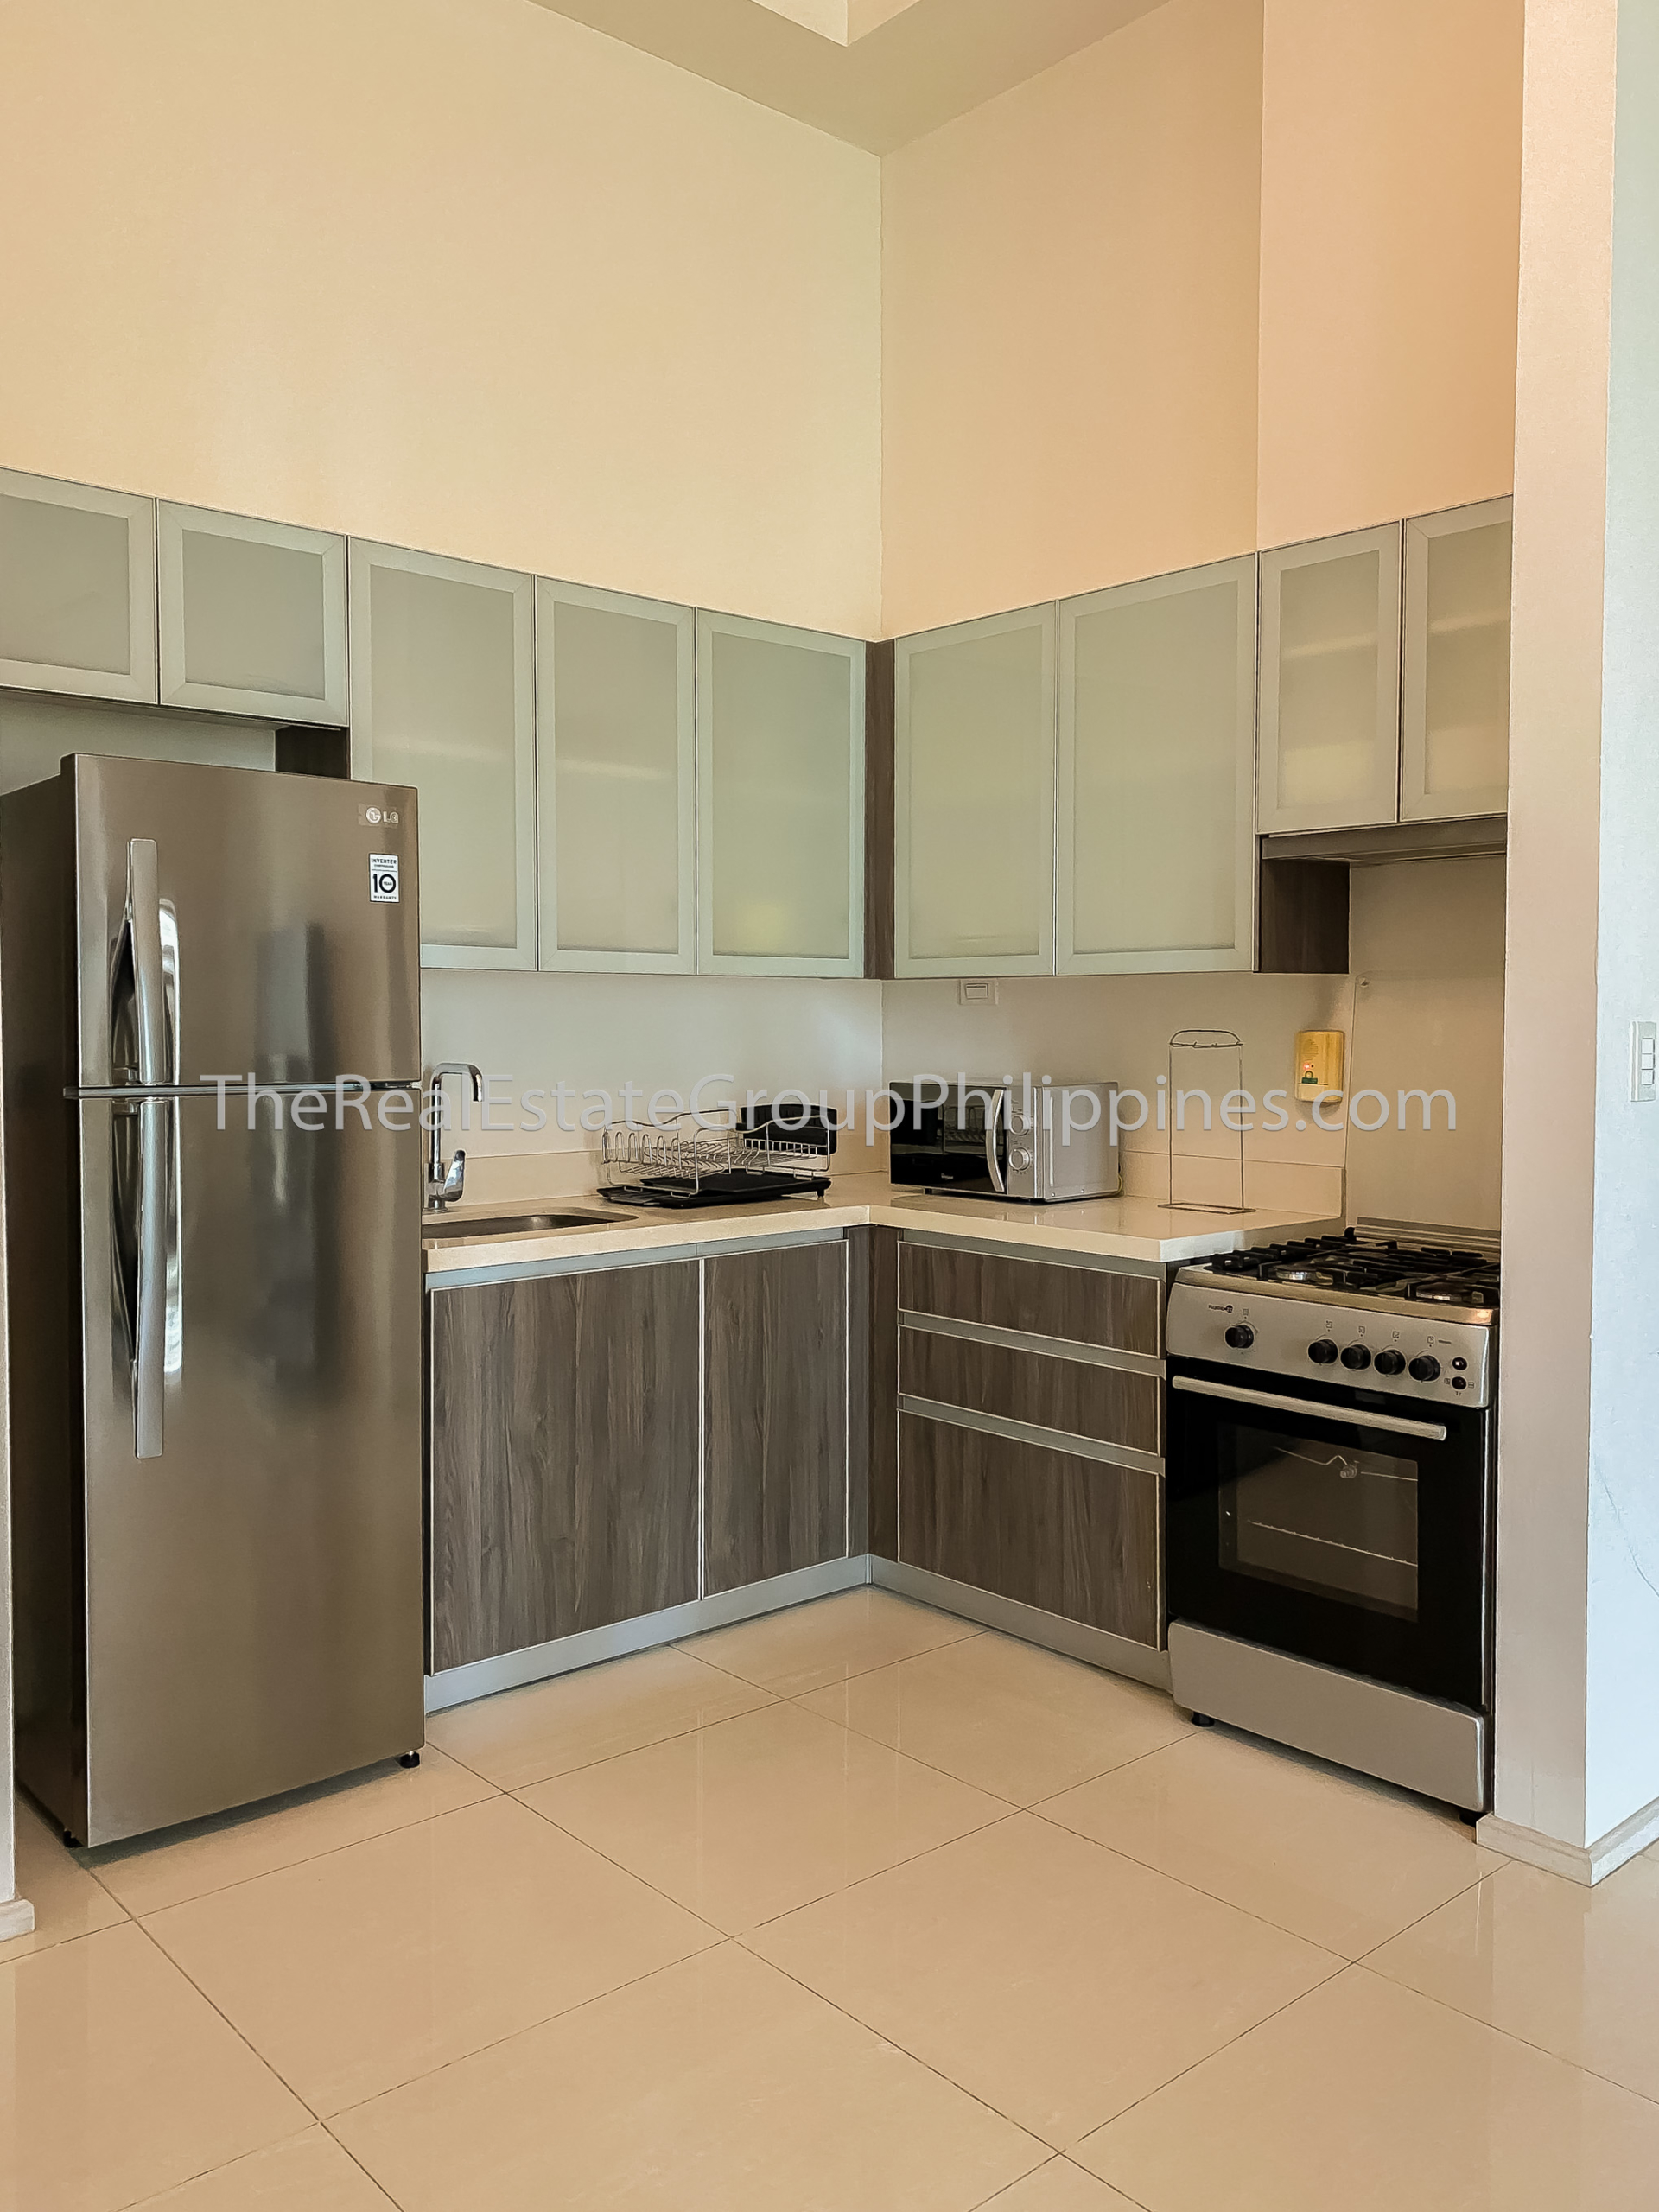 1BR Condo For Rent, Arya Residences, Tower 1, BGC - ₱75K Per Month-9